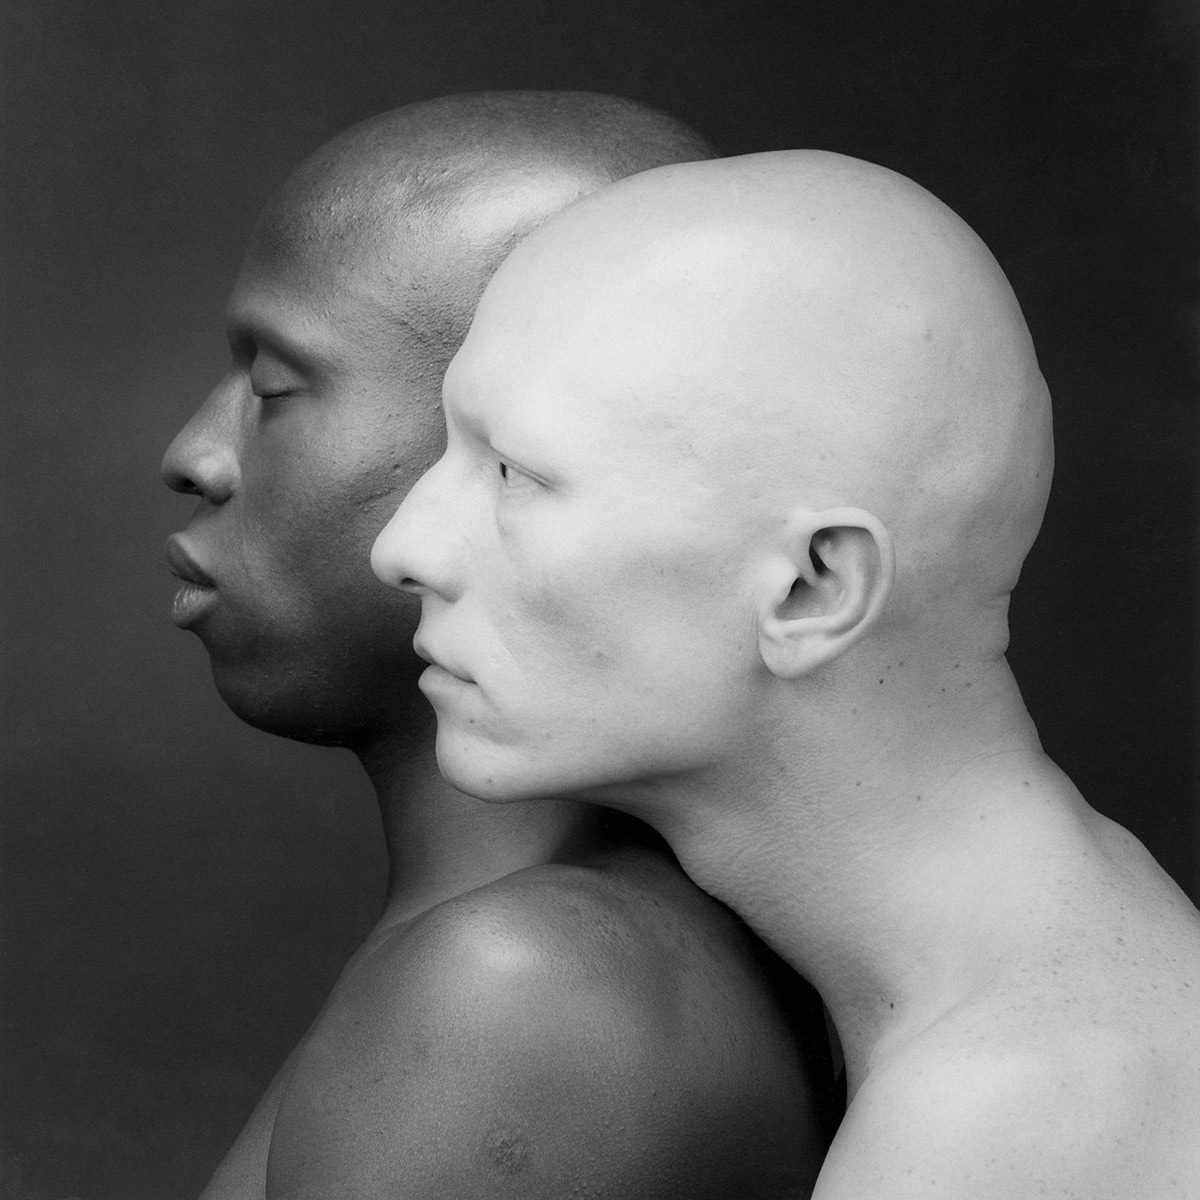 MAPPLETHORPE. LOOK AT THE PICTURES